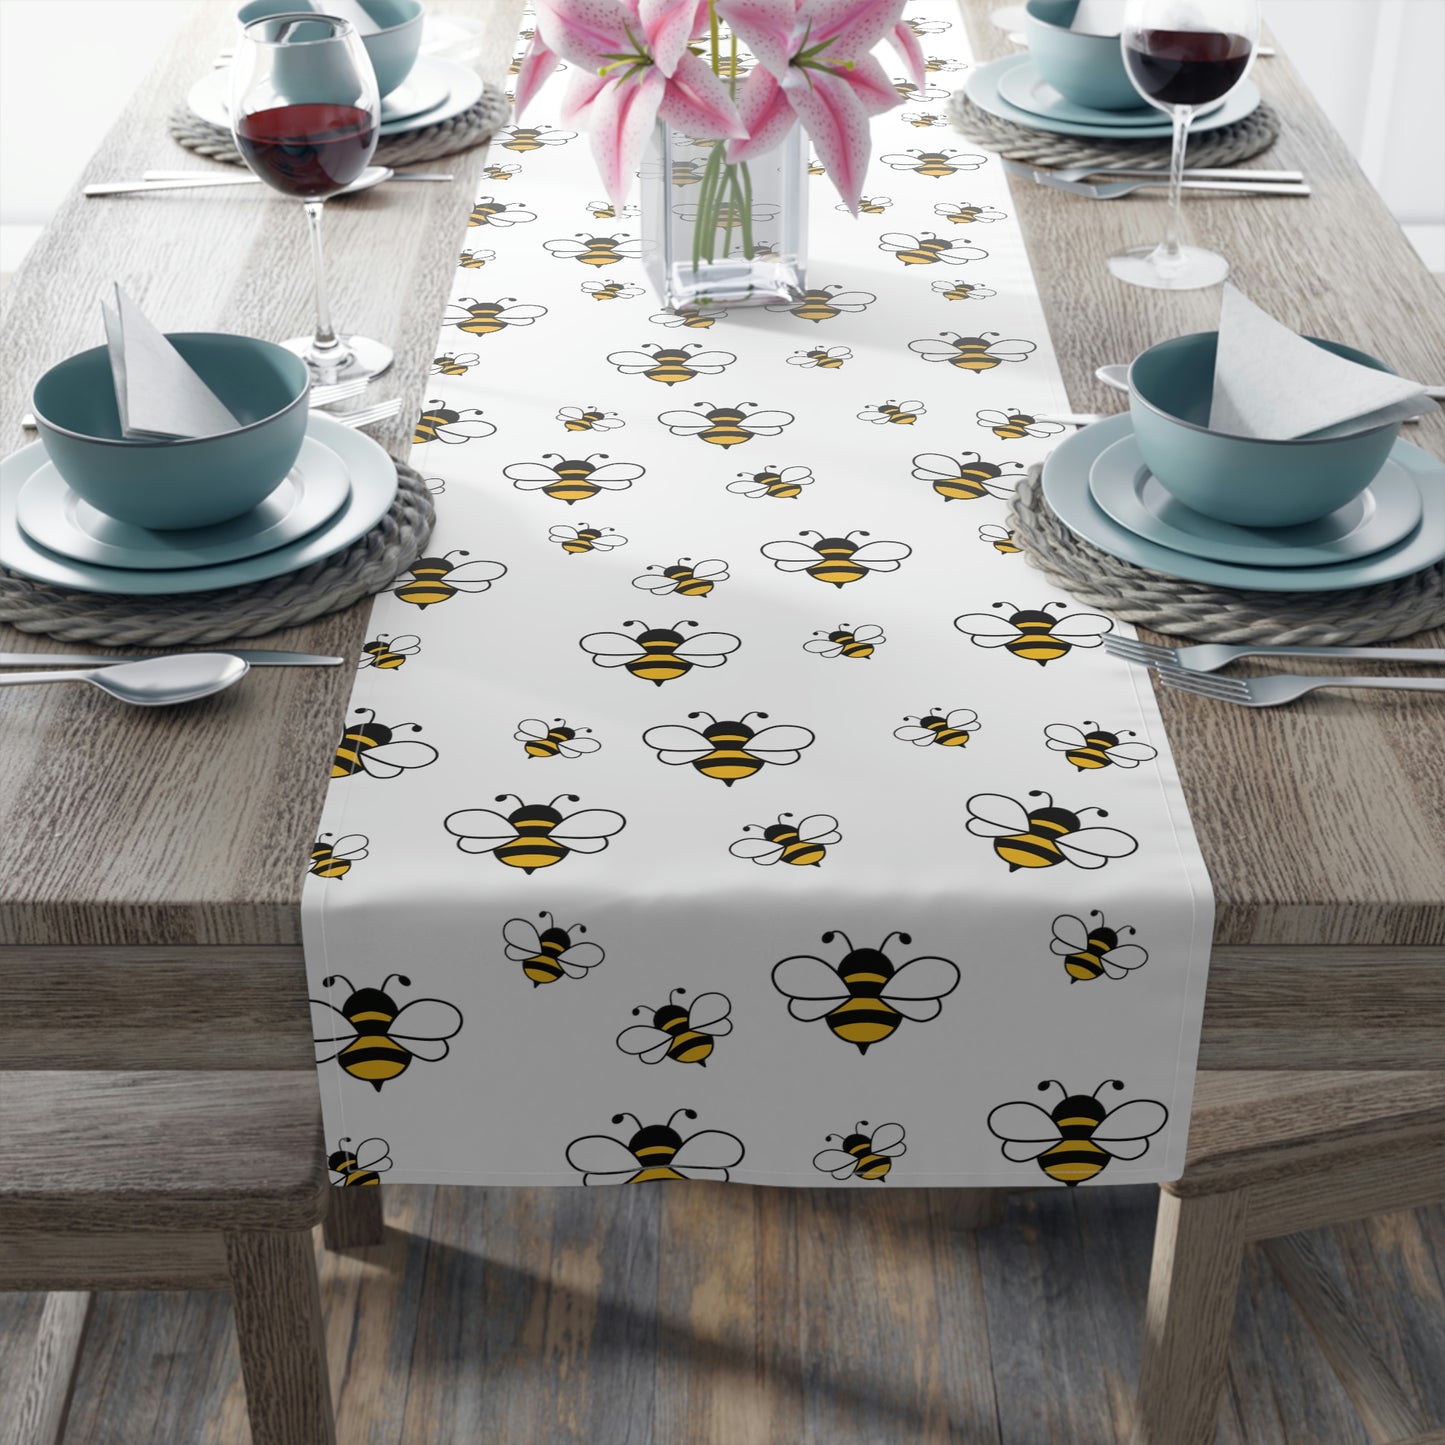 honey bee table runner with bumble bee pattern